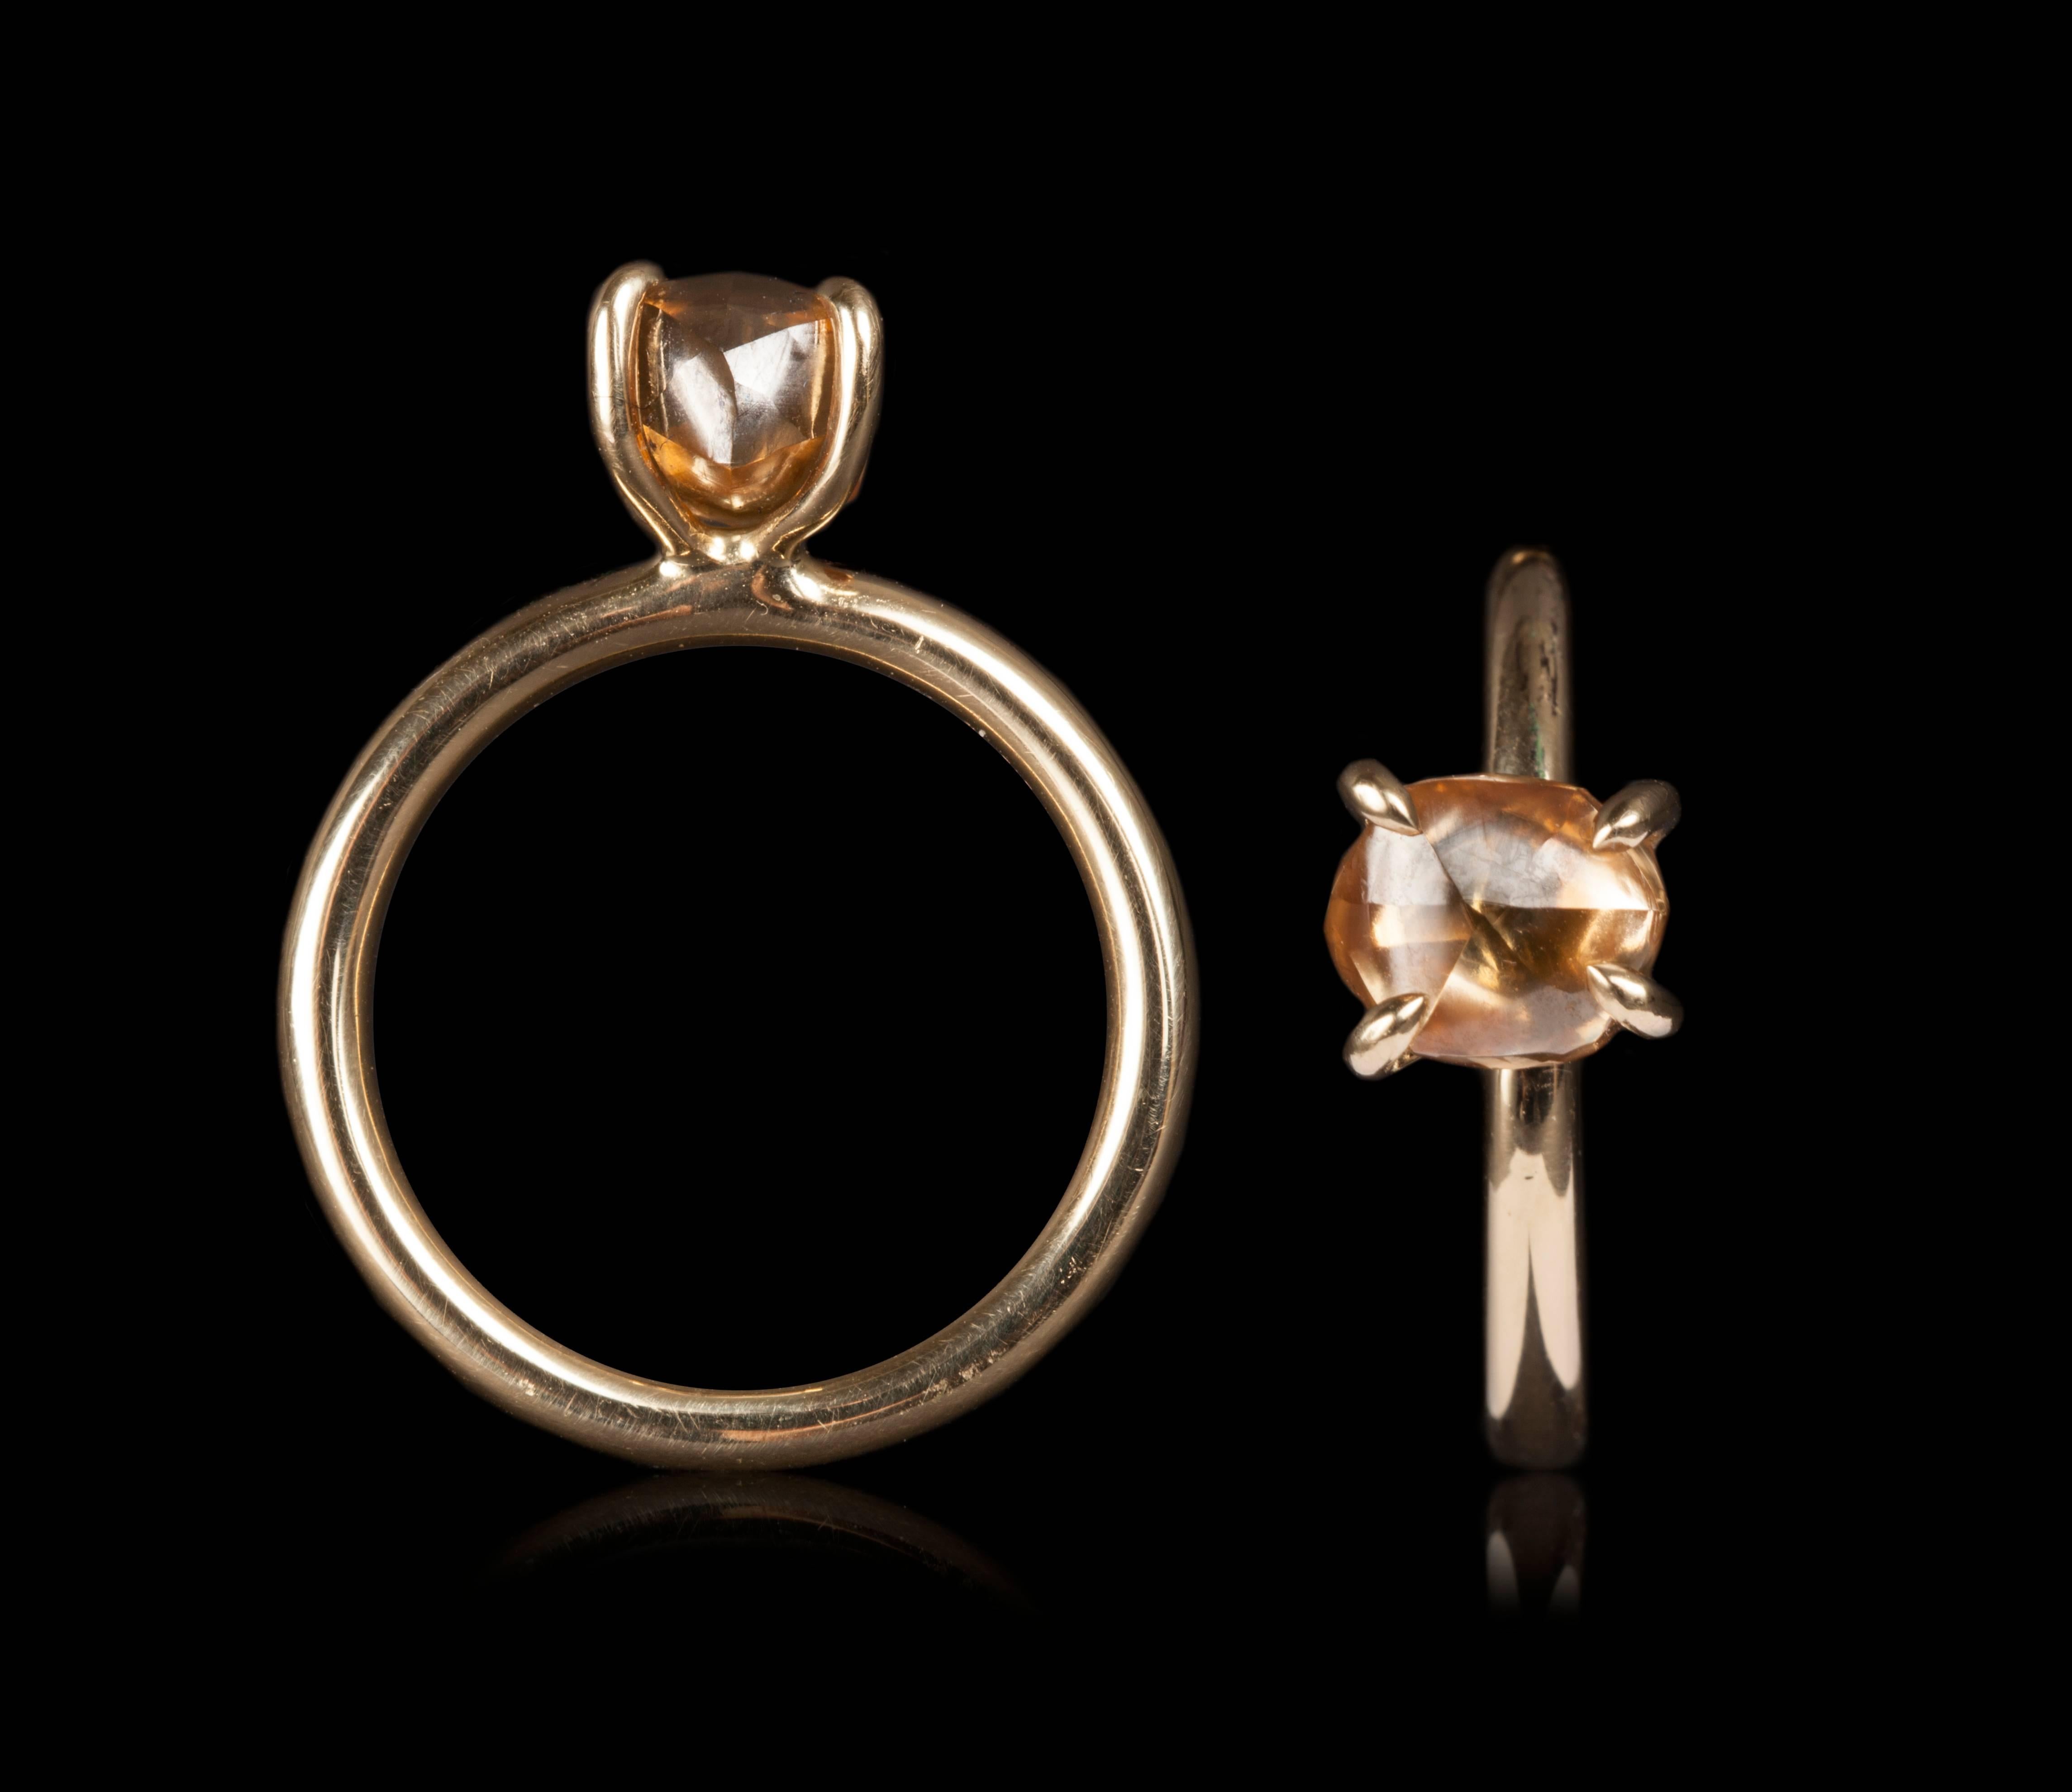 One-of-a-kind 2.90 ct. Natural Fancy Orange Brown rough diamond in 14K handcrafted gold ring.

Every rough diamond from Roughdiamonds dk has been personally handpicked by Maya Bjørnsten. The diamonds we reject are sent back to be cut into regular